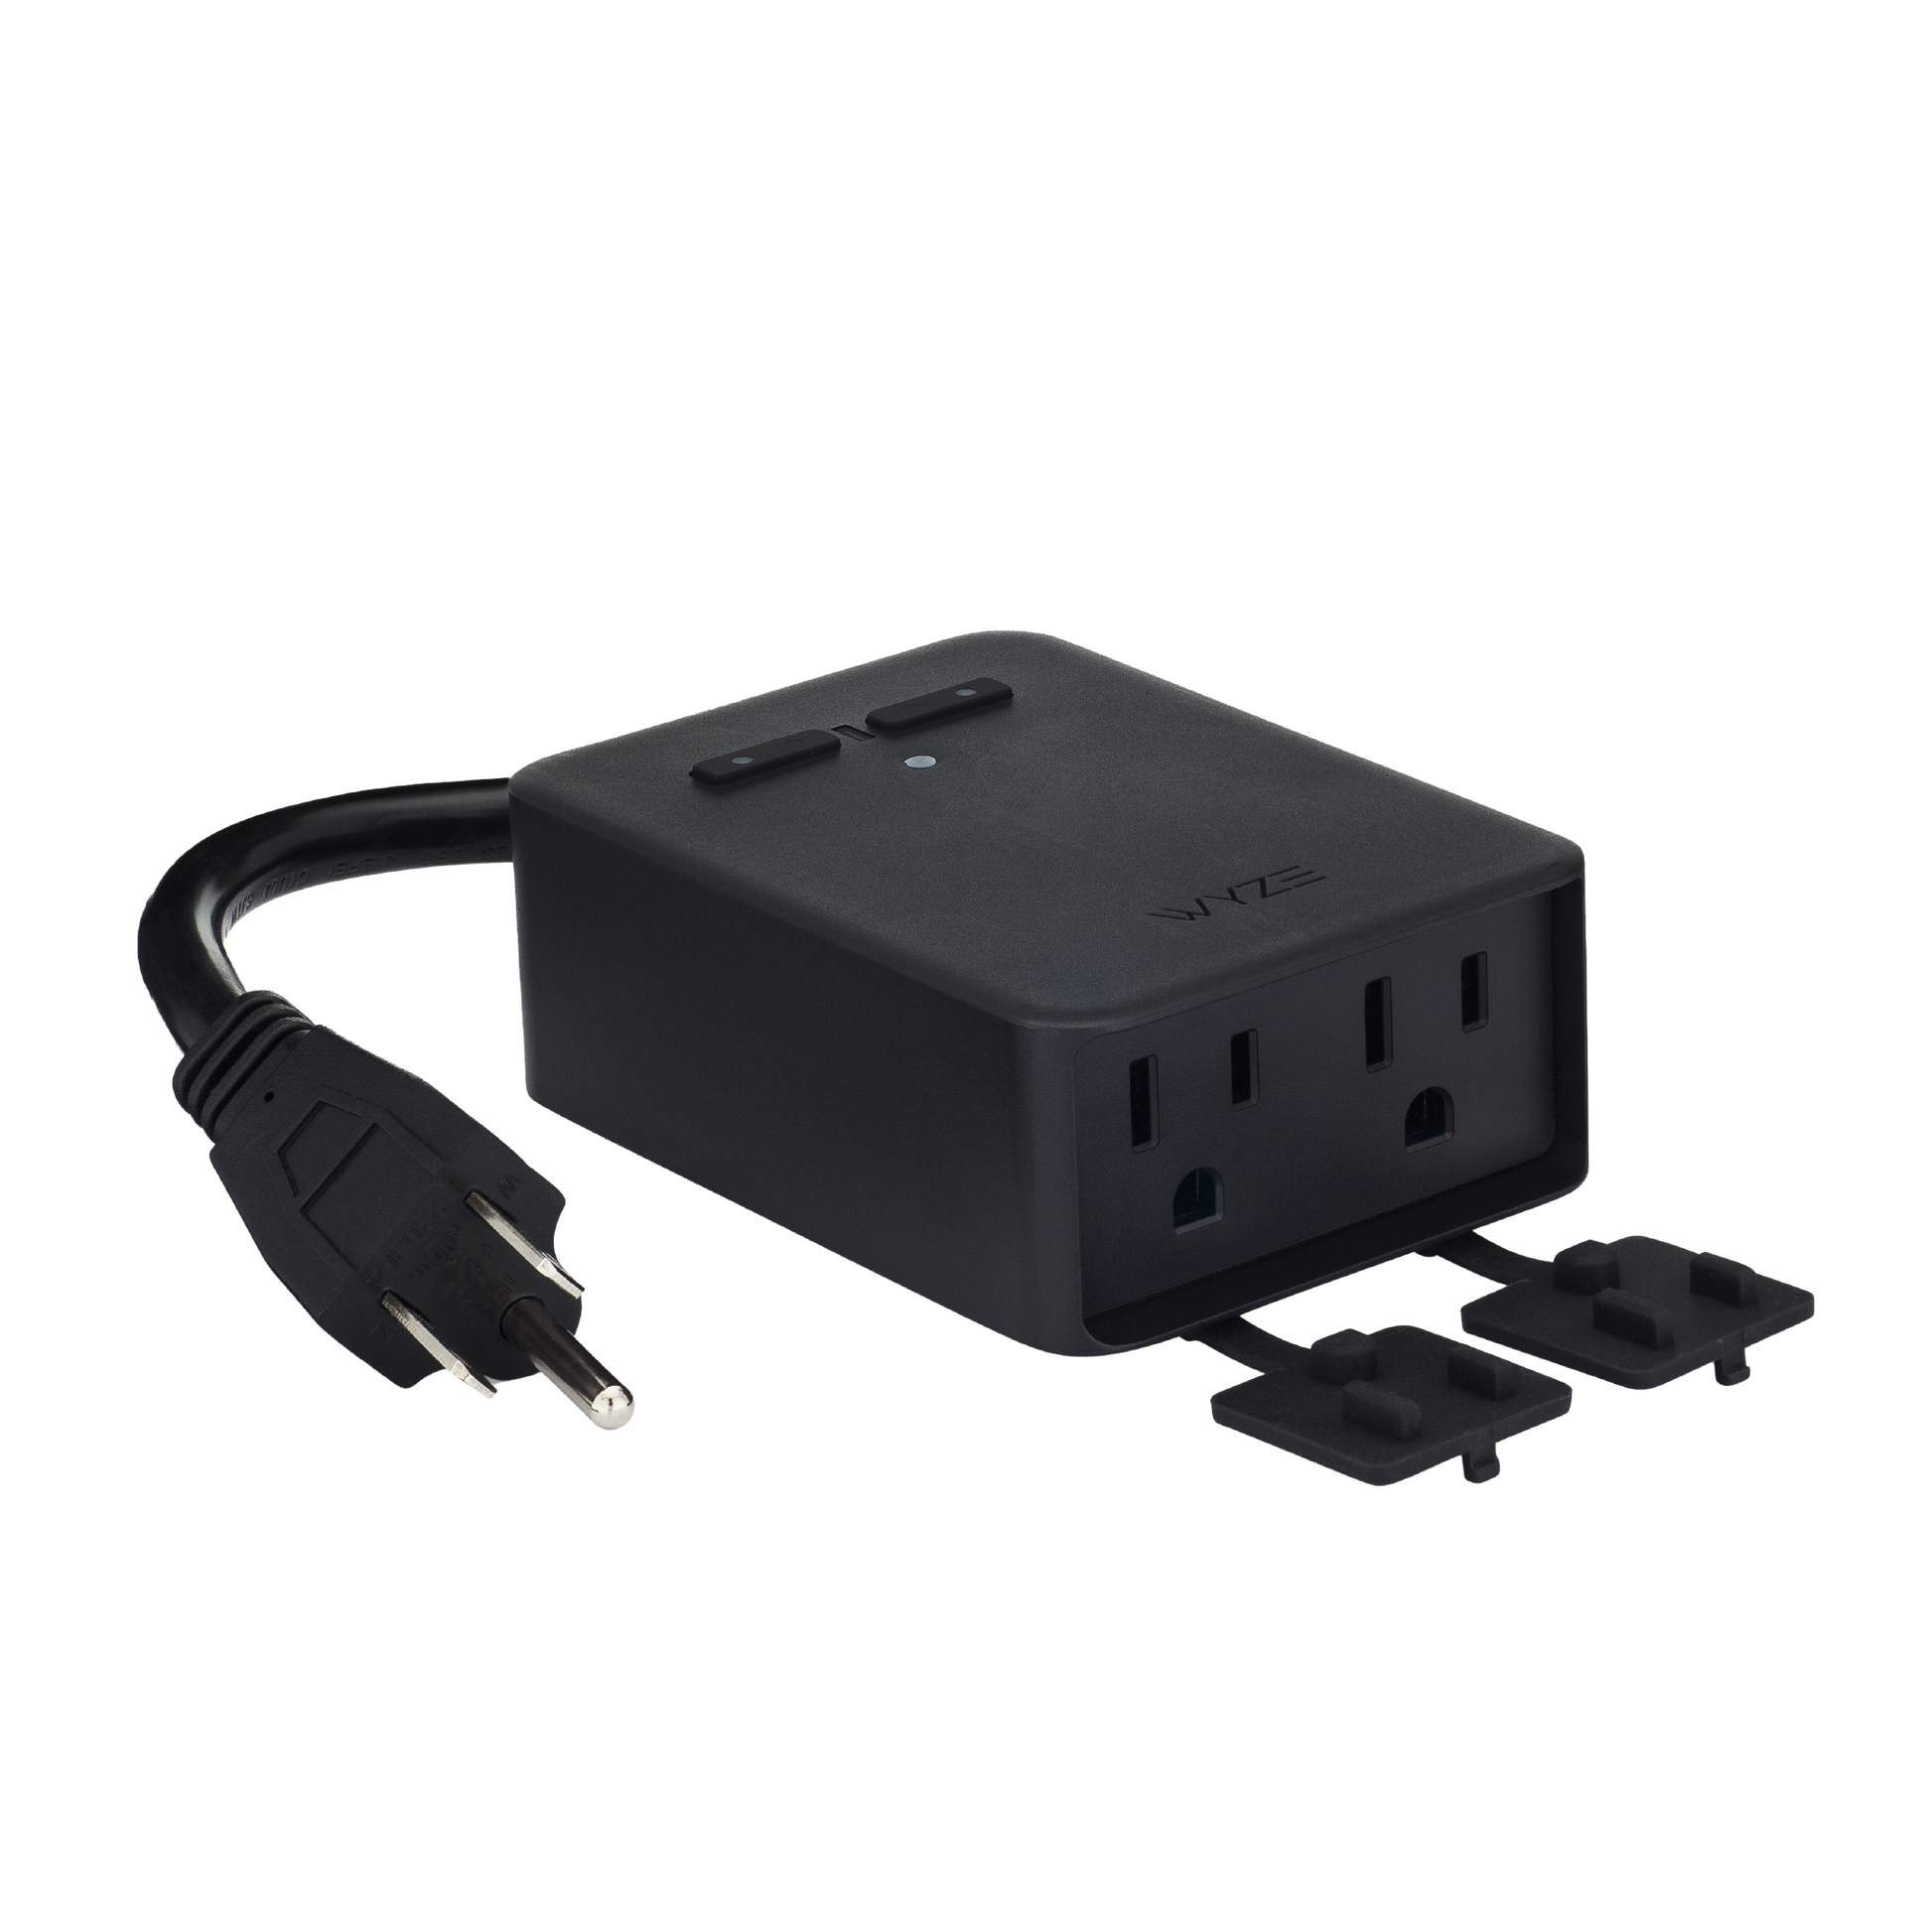 Outdoor Smart Plug, Outdoor Wi-Fi Outlet with 2 Sockets